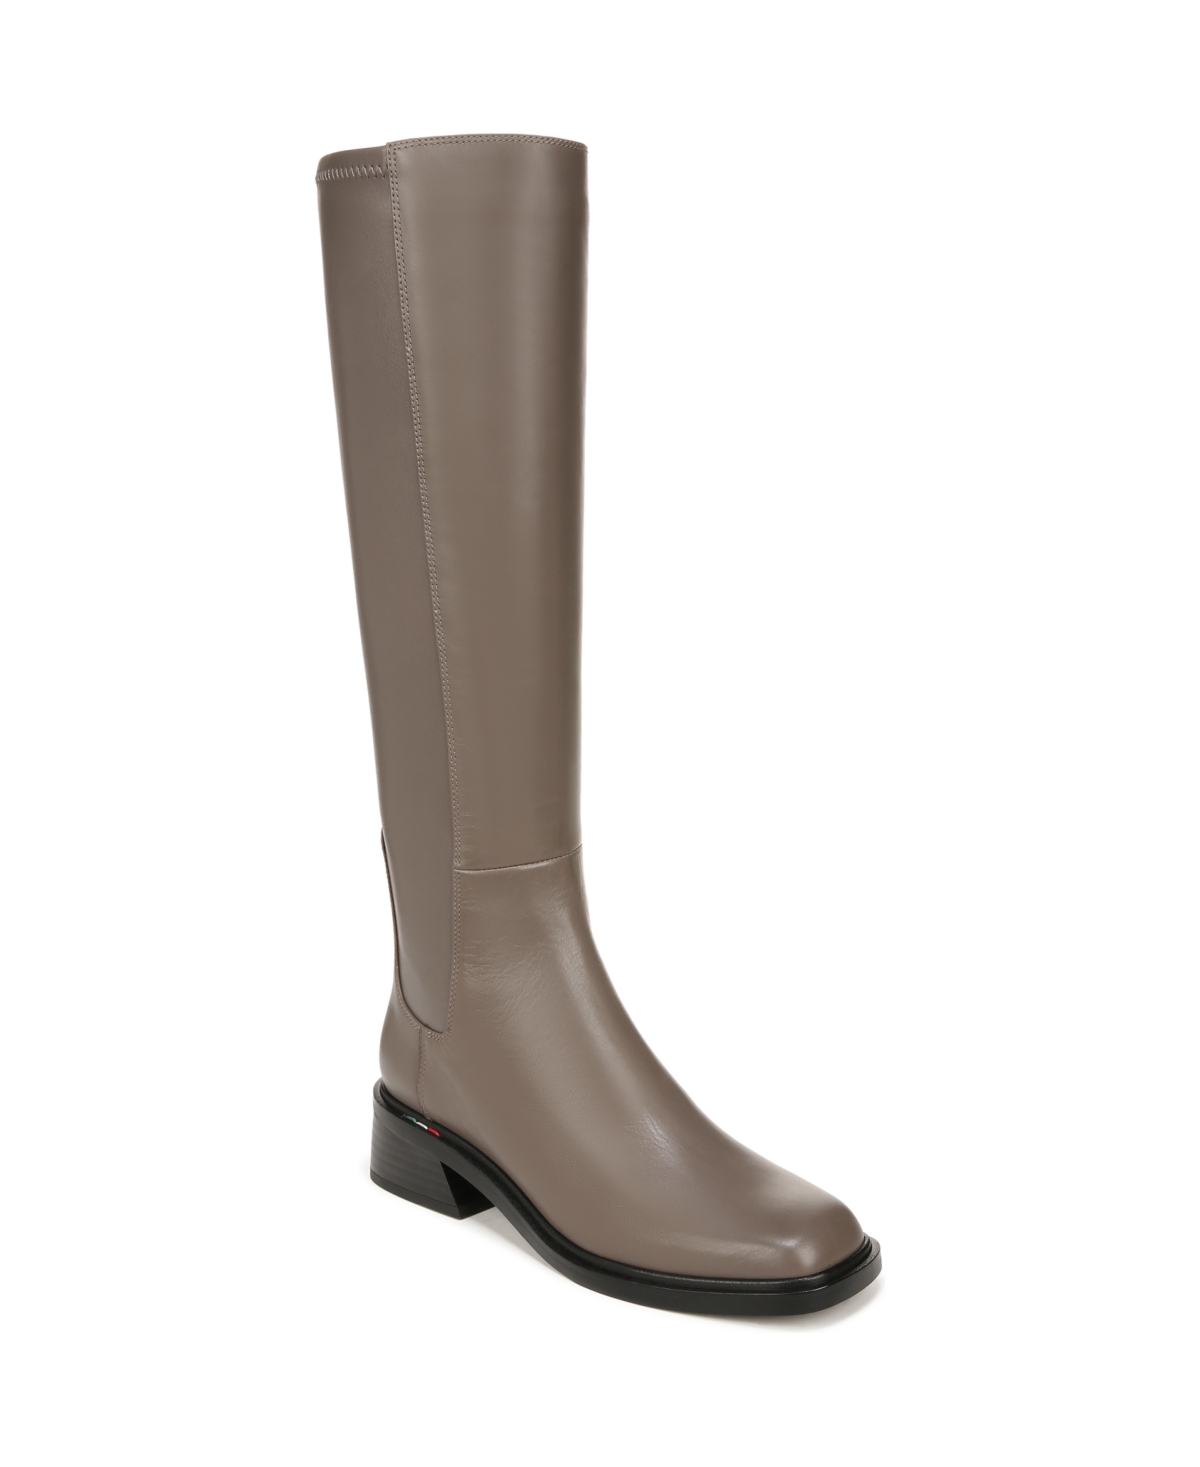 FRANCO SARTO WOMEN'S GISELLE WIDE CALF HIGH SHAFT BOOTS